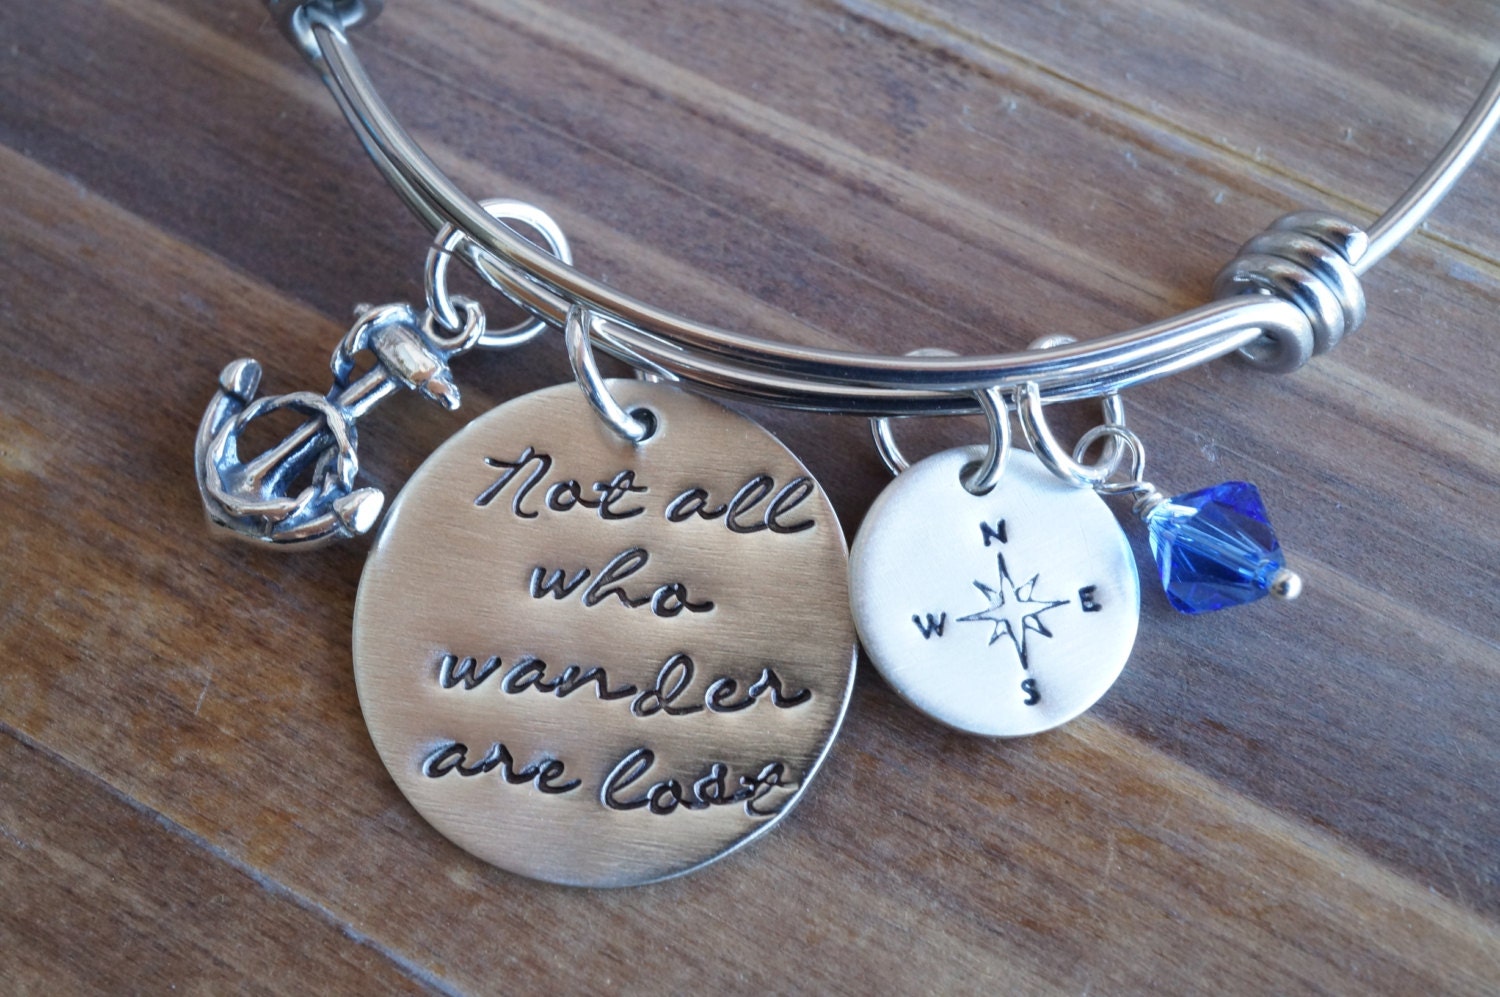 Not All Who Wander Are Lost Bangle Bracelet with Compass, Anchor & Swarovski Stone | Graduation Gift | Gift for Her | Inspiration Gift